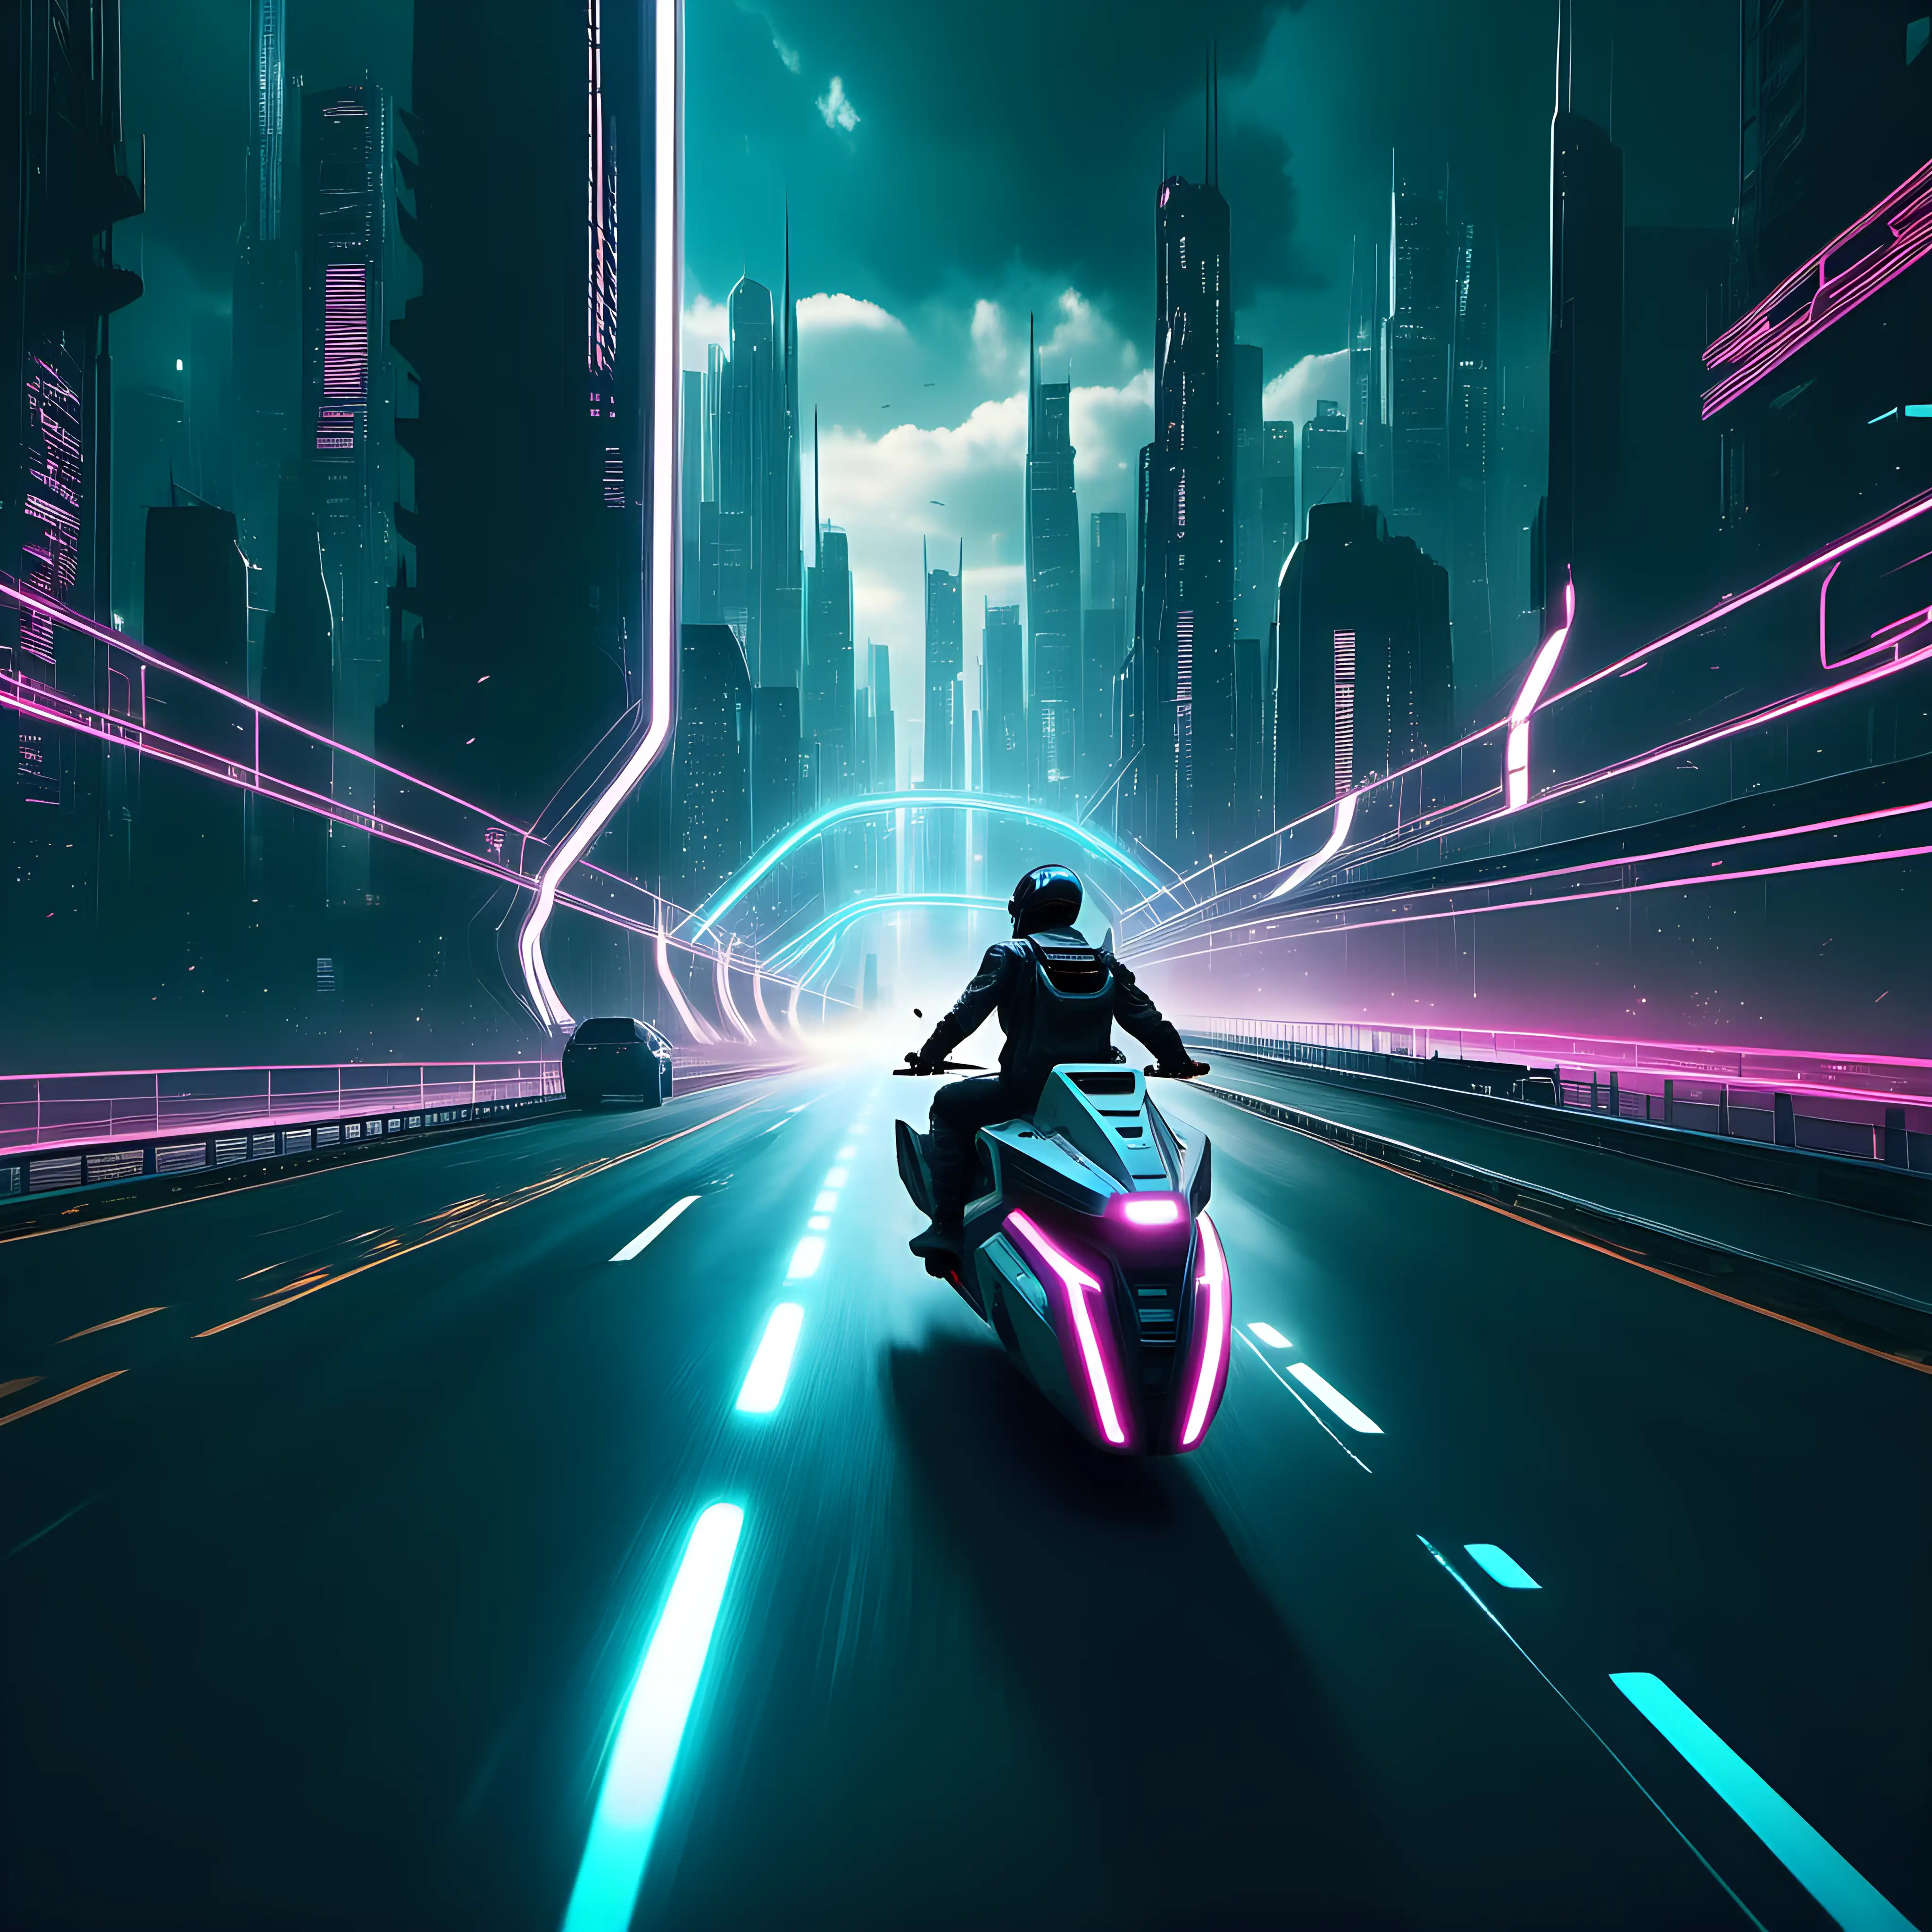 Futuristic Hoverbike Ride through Cyberpunk City with Dazzling Light Trail